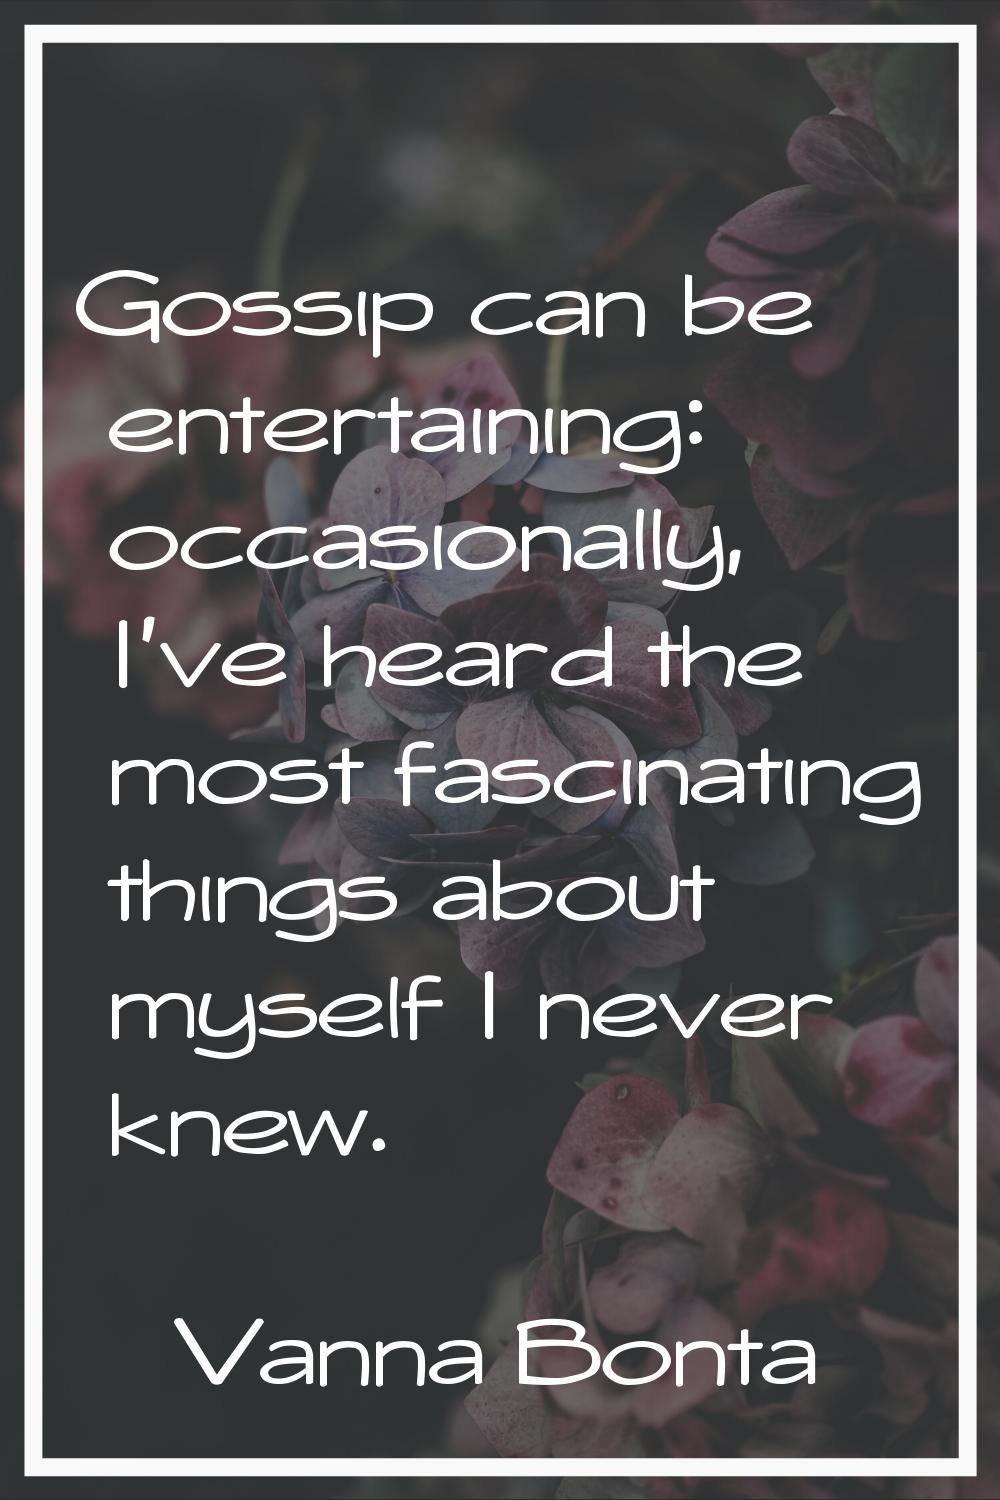 Gossip can be entertaining: occasionally, I've heard the most fascinating things about myself I nev